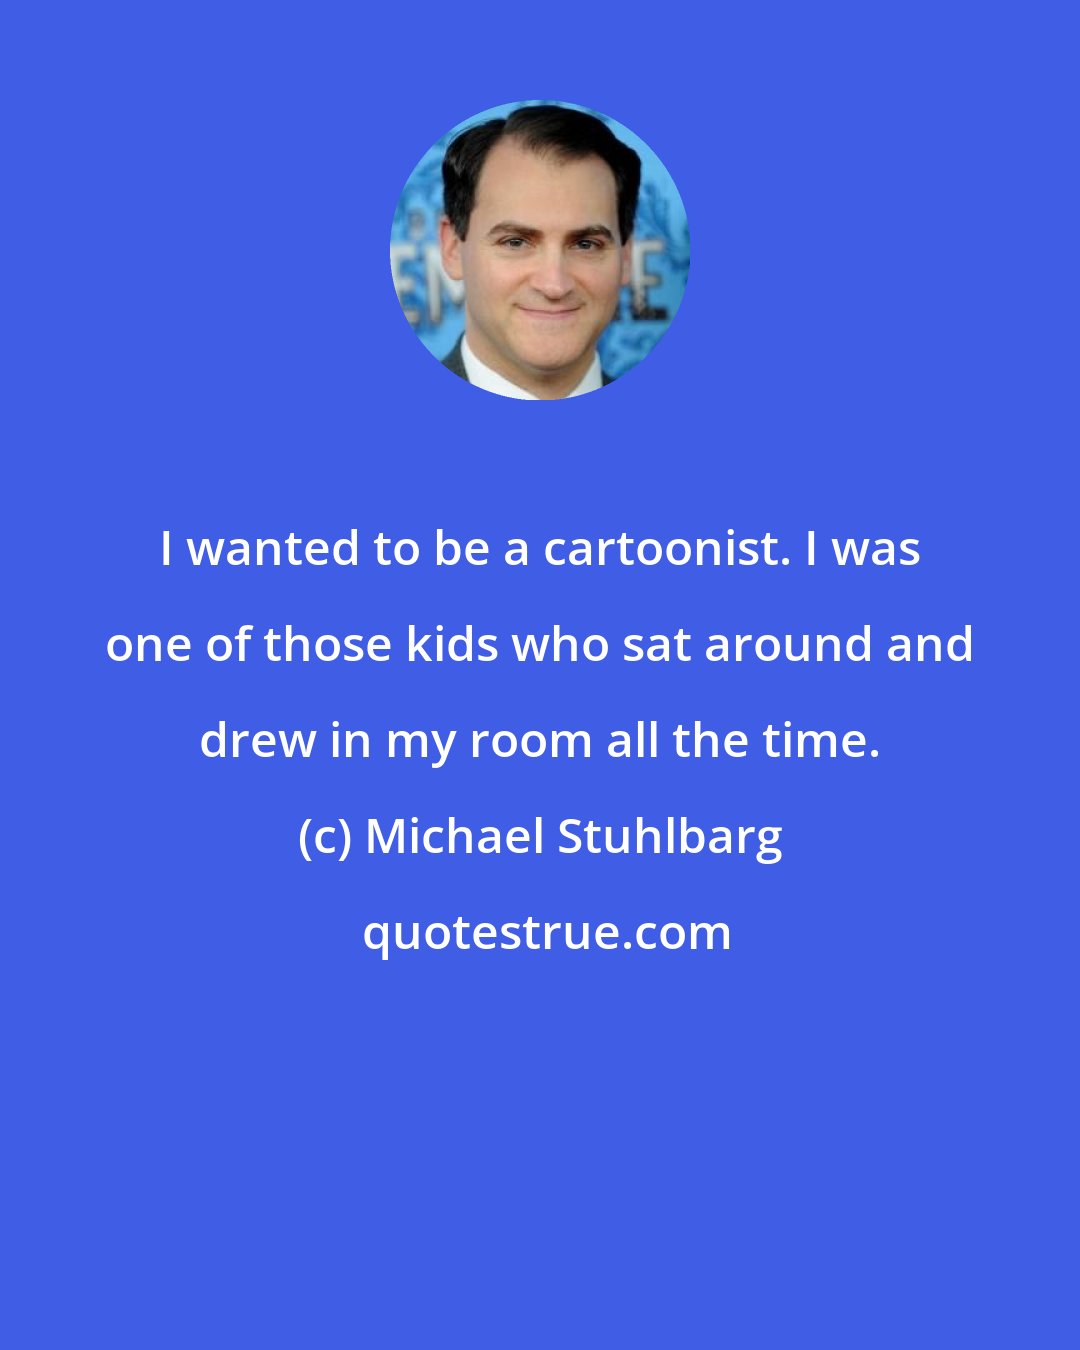 Michael Stuhlbarg: I wanted to be a cartoonist. I was one of those kids who sat around and drew in my room all the time.